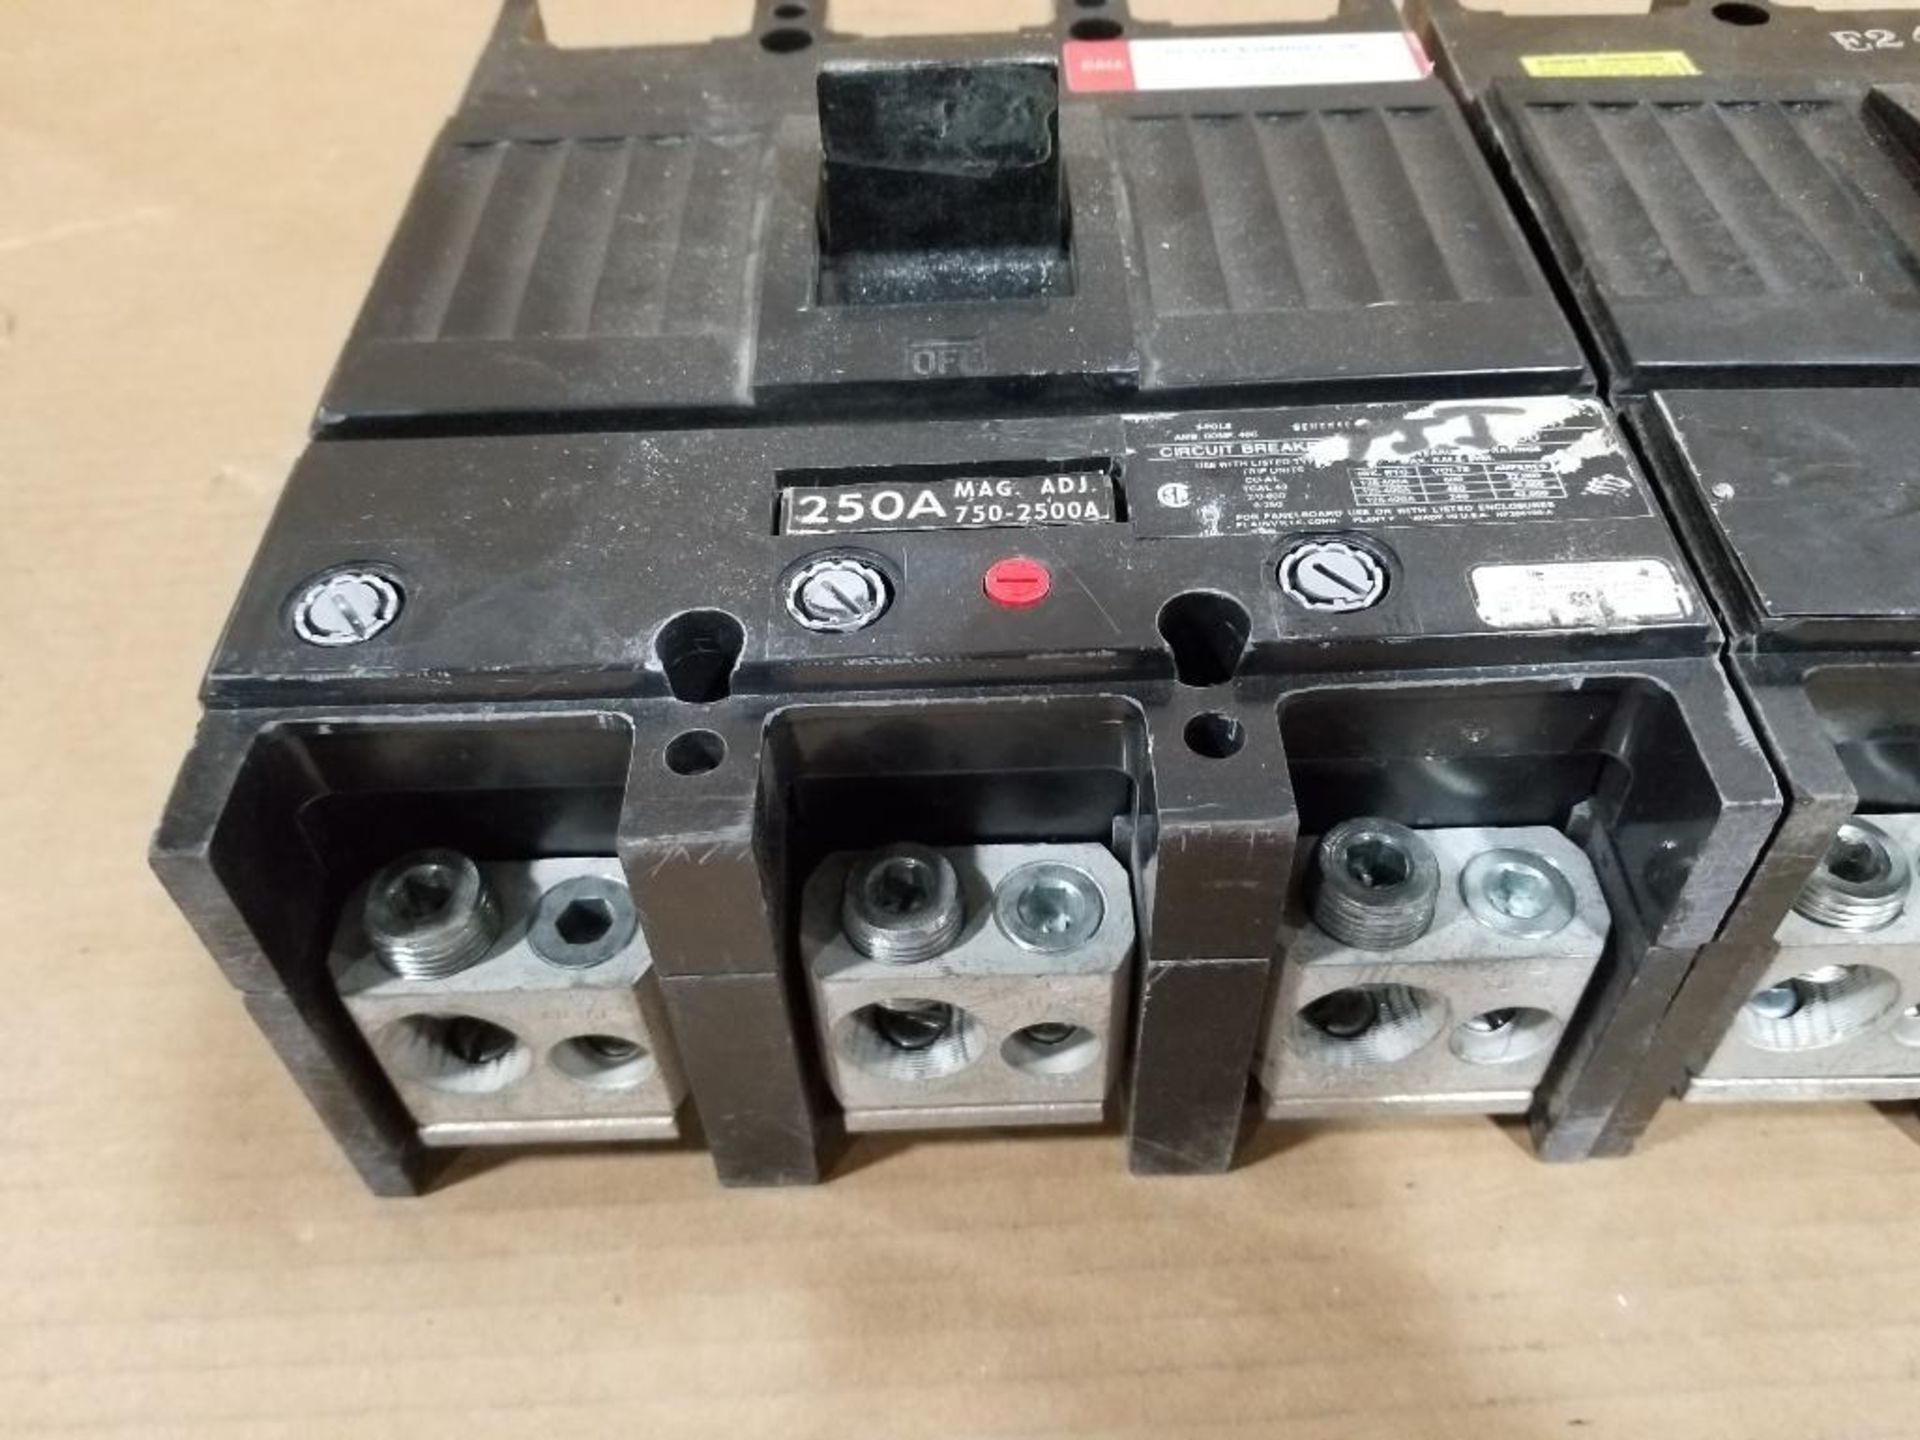 Qty 2 - GE Molded case circuit breakers. - Image 4 of 5